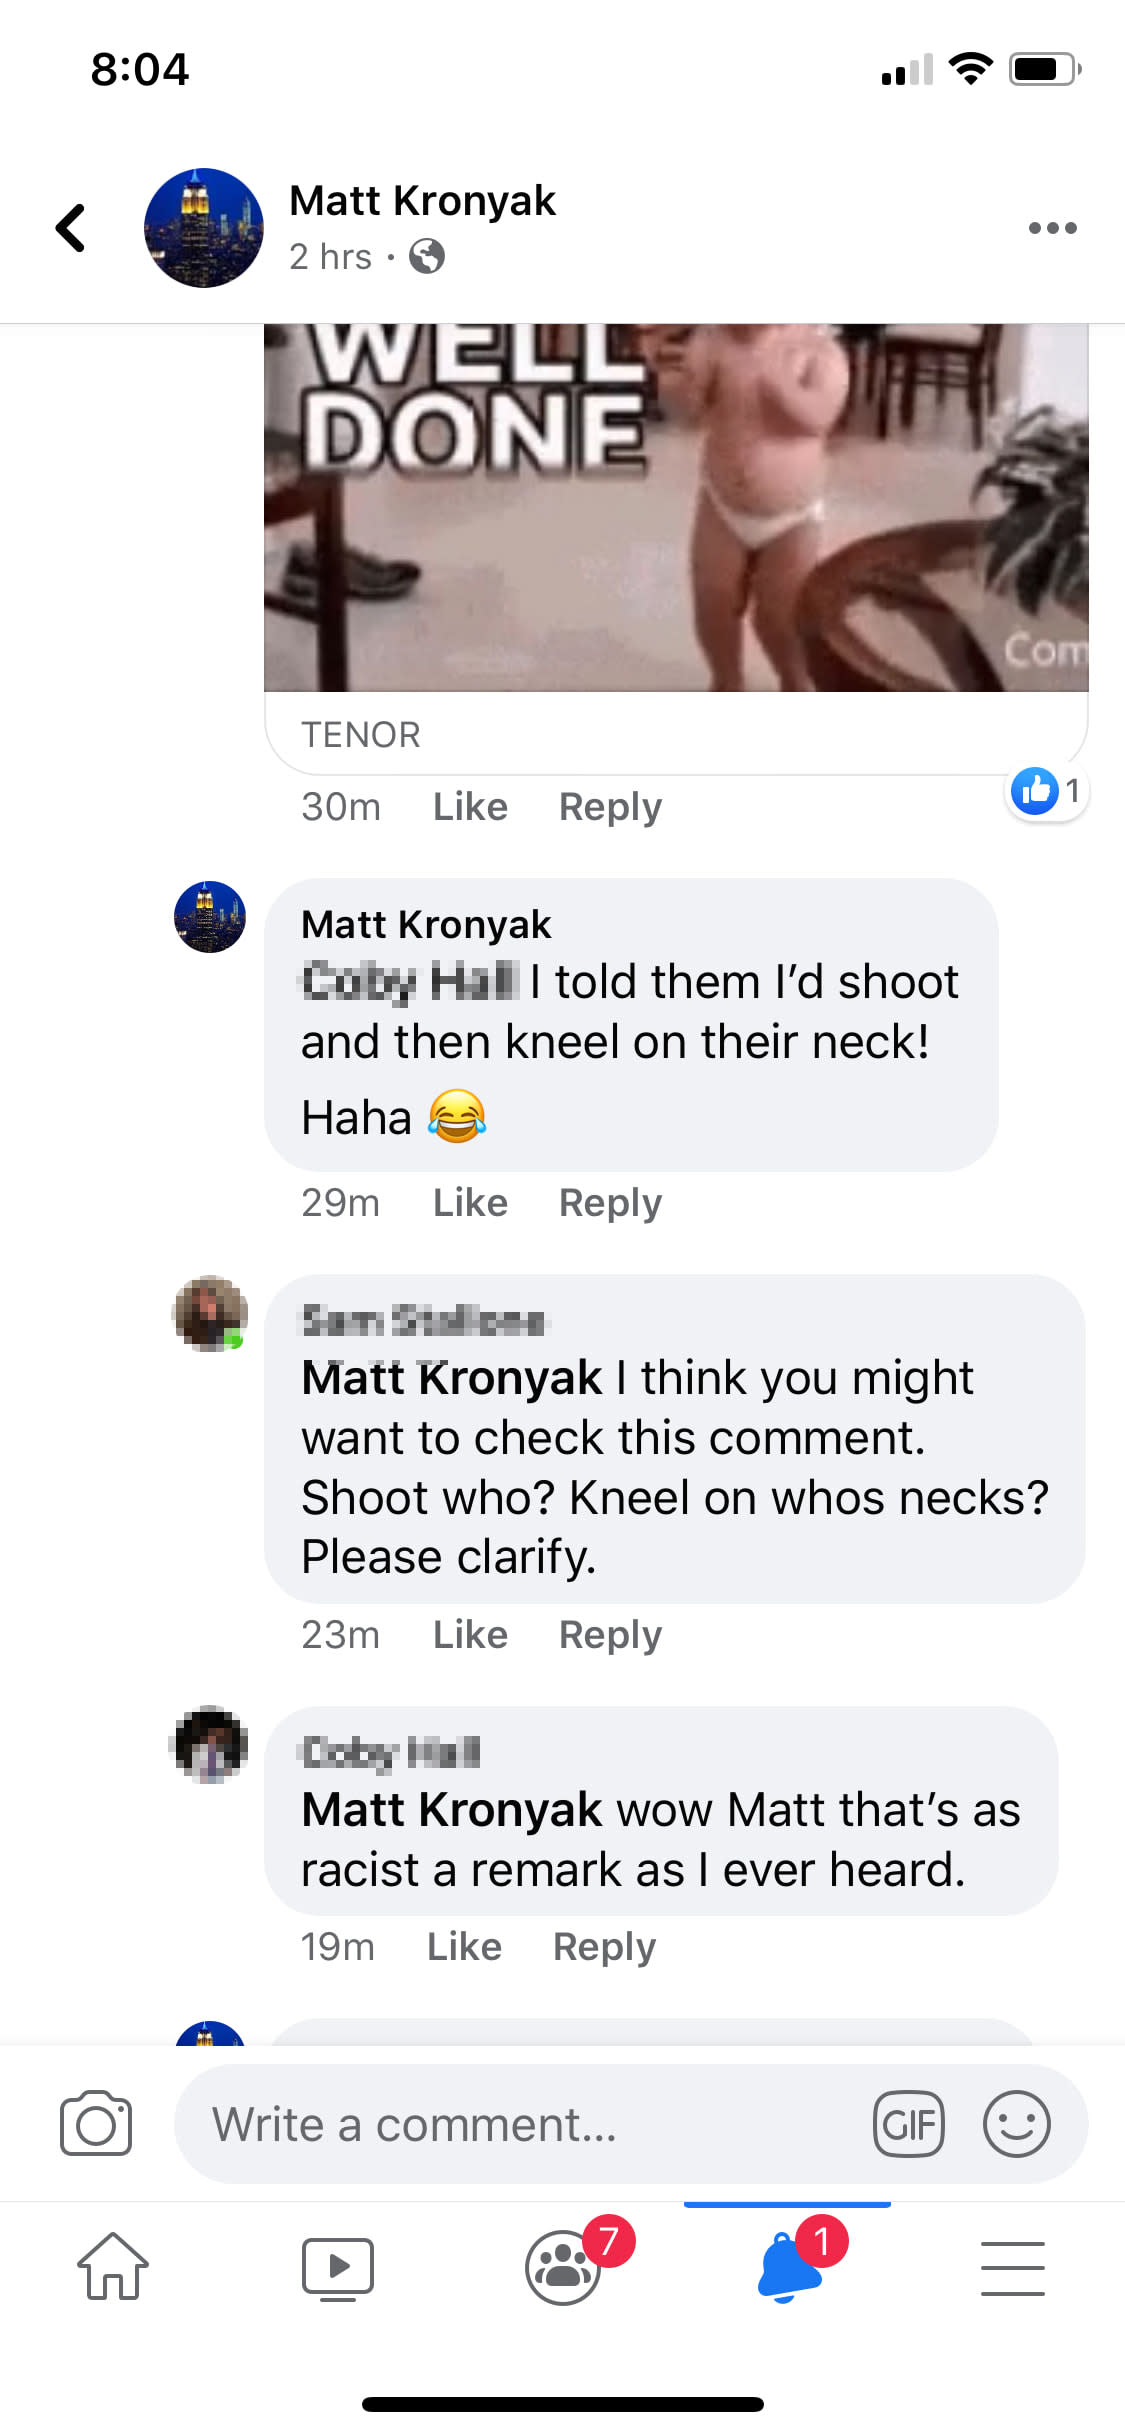 Image: N.J. volunteer EMT fired over racist, threatening social media comments to protesters (Provided by Dylan Majsiak)